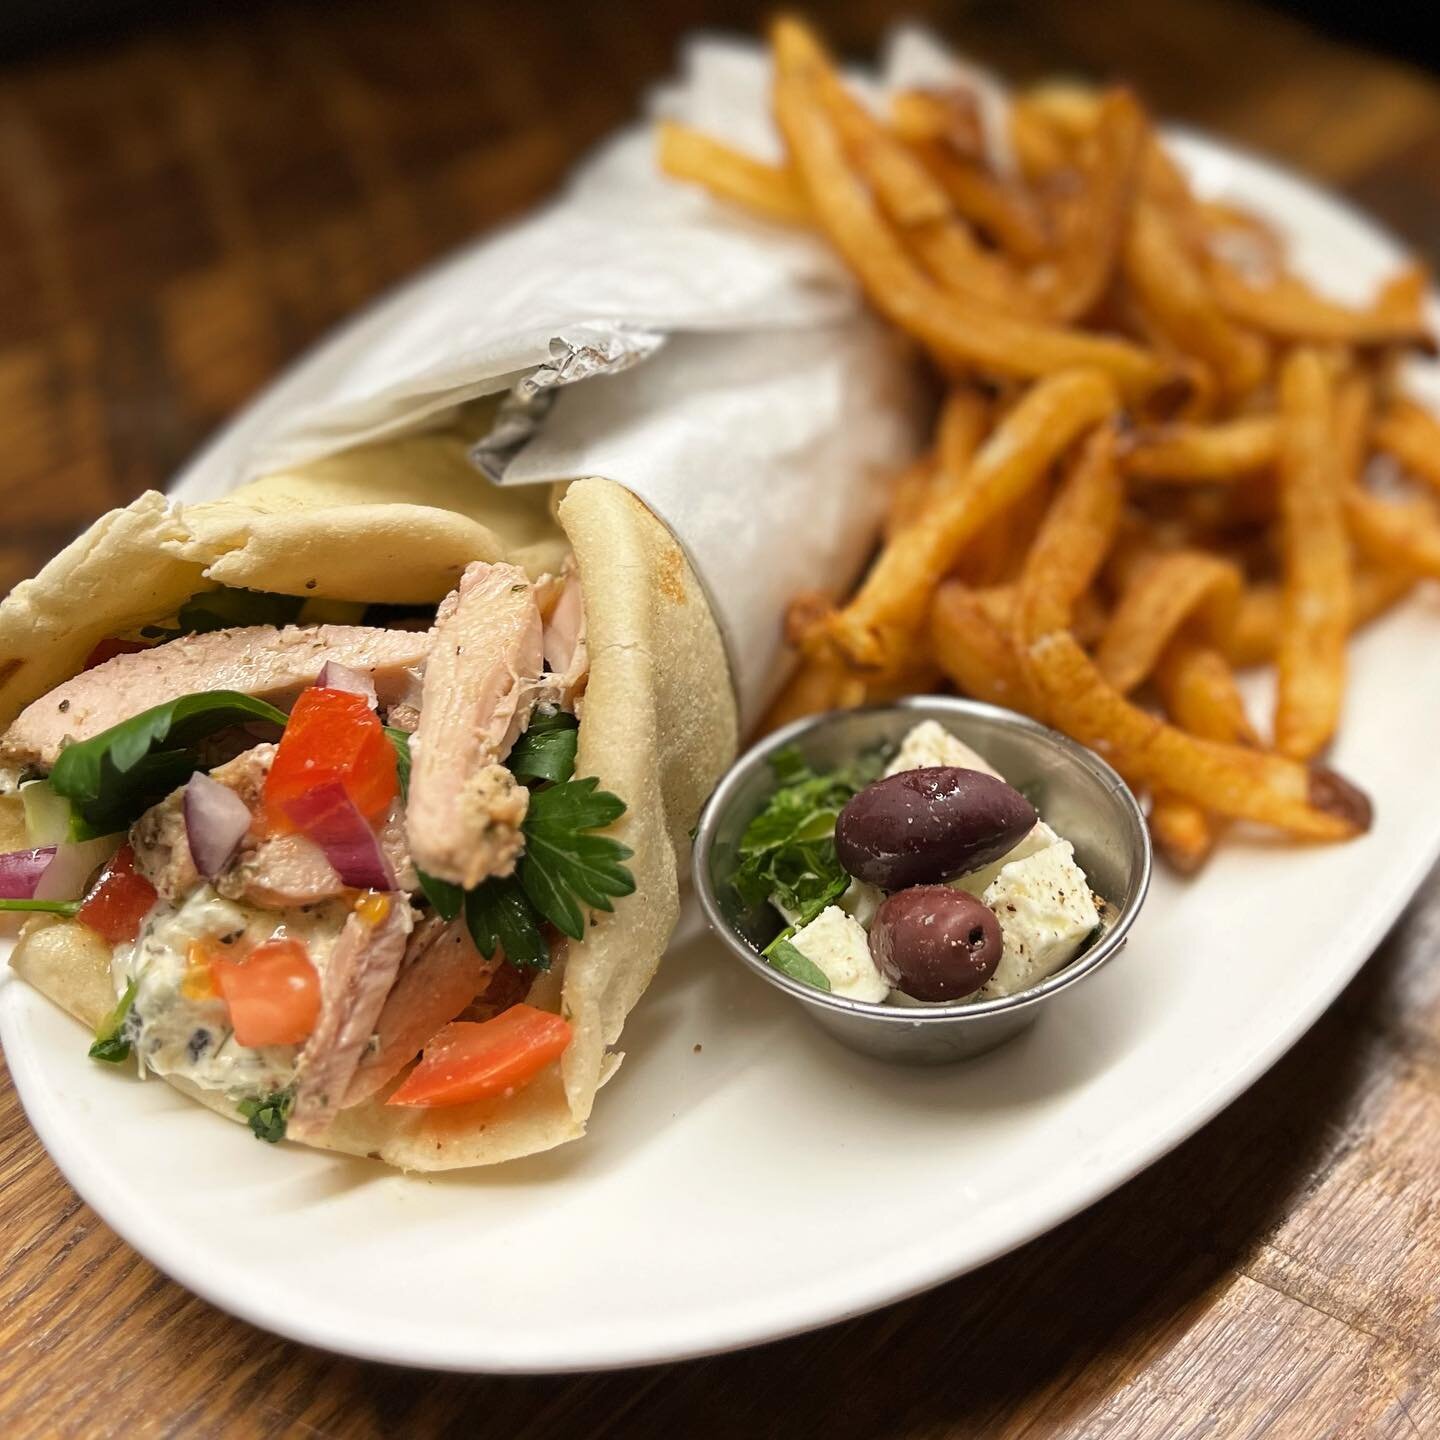 Grilled Chicken Gyro 🥙 yogurt, lemon &amp; herb marinated all-natural chicken thigh, house tzatziki, chopped salad, our fresh grilled pita, hand-cut fries, olives and feta 🇬🇷 #gyro #chickengyro #chickengyros #greekfood #greekcooking #frenchfries #